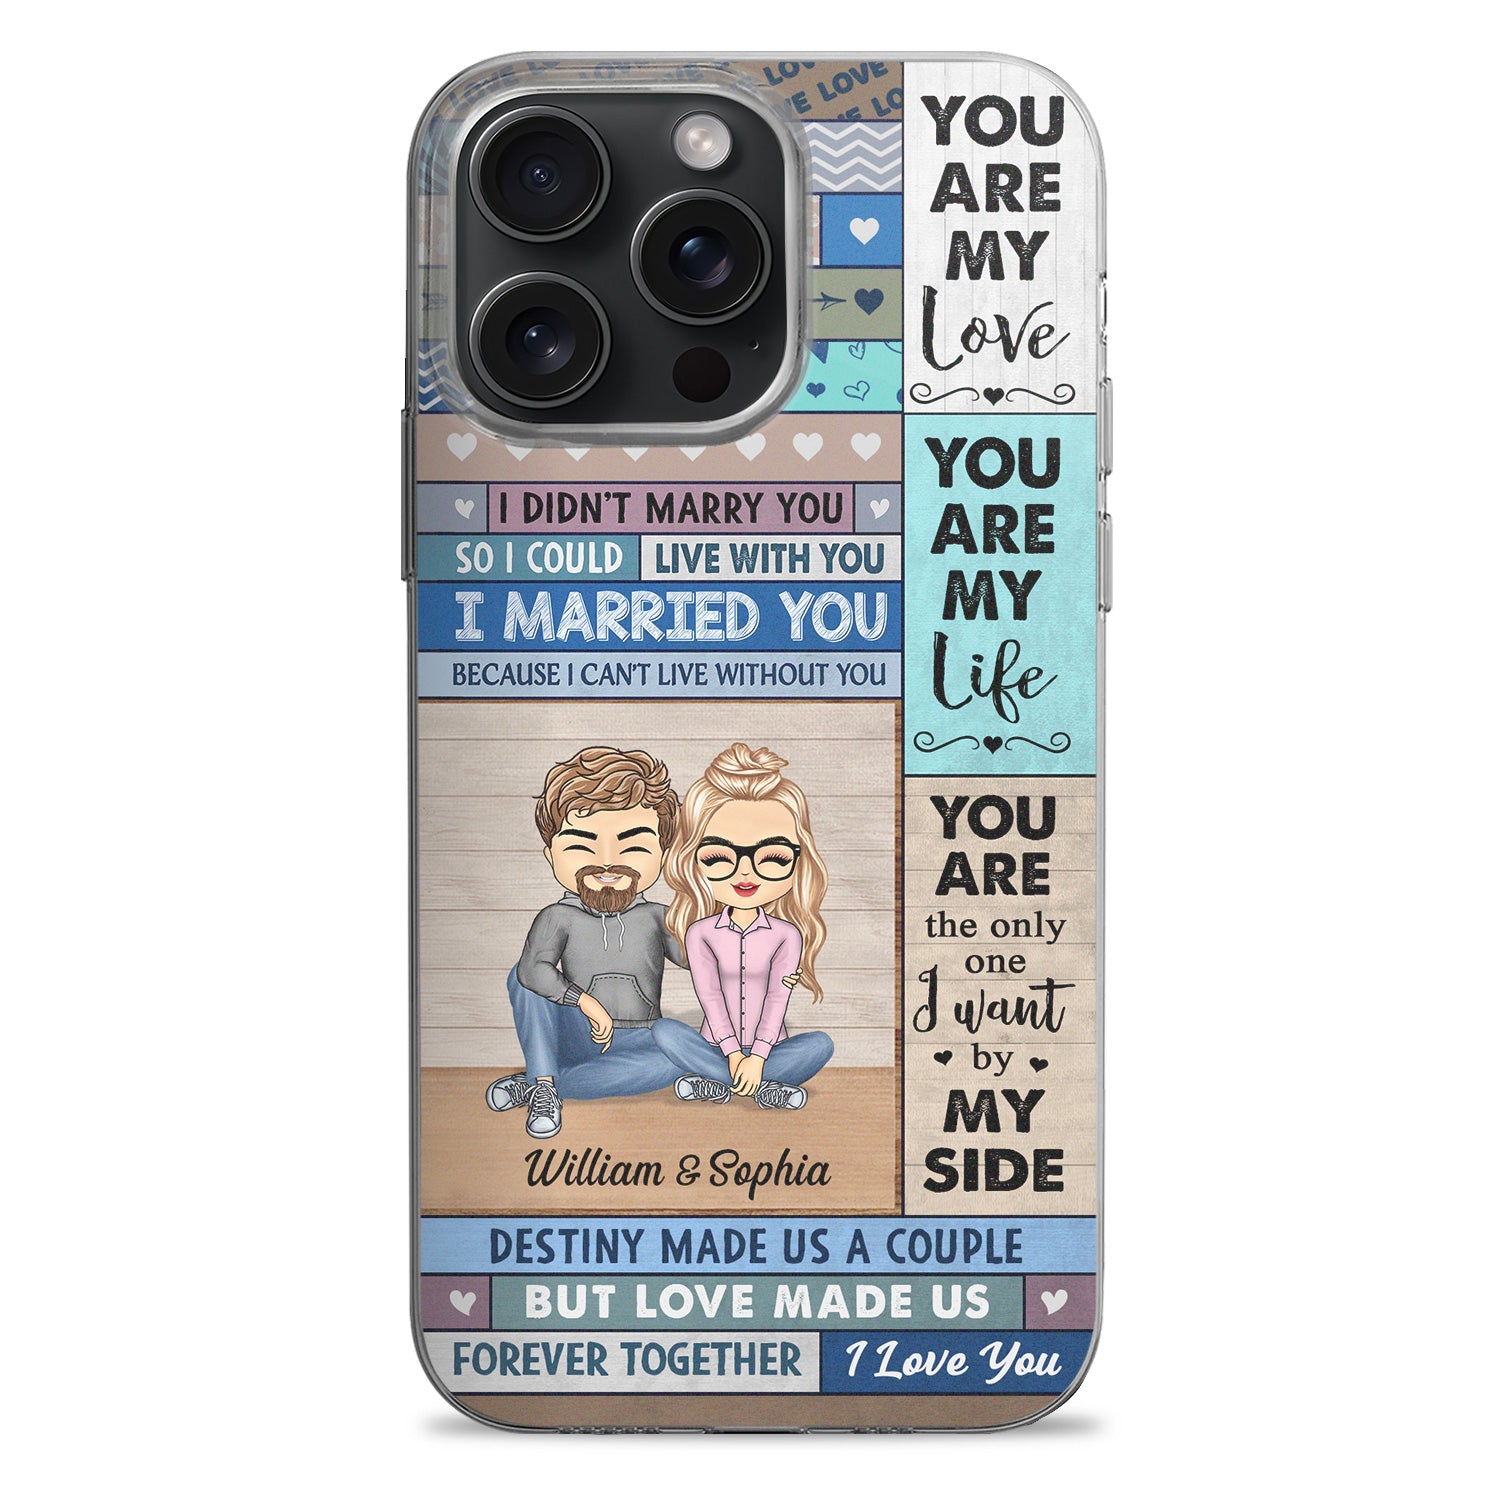 You Are The Only One I Want By My Side - Loving, Anniversary Gift For Spouse, Husband, Wife - Personalized Clear Phone Case